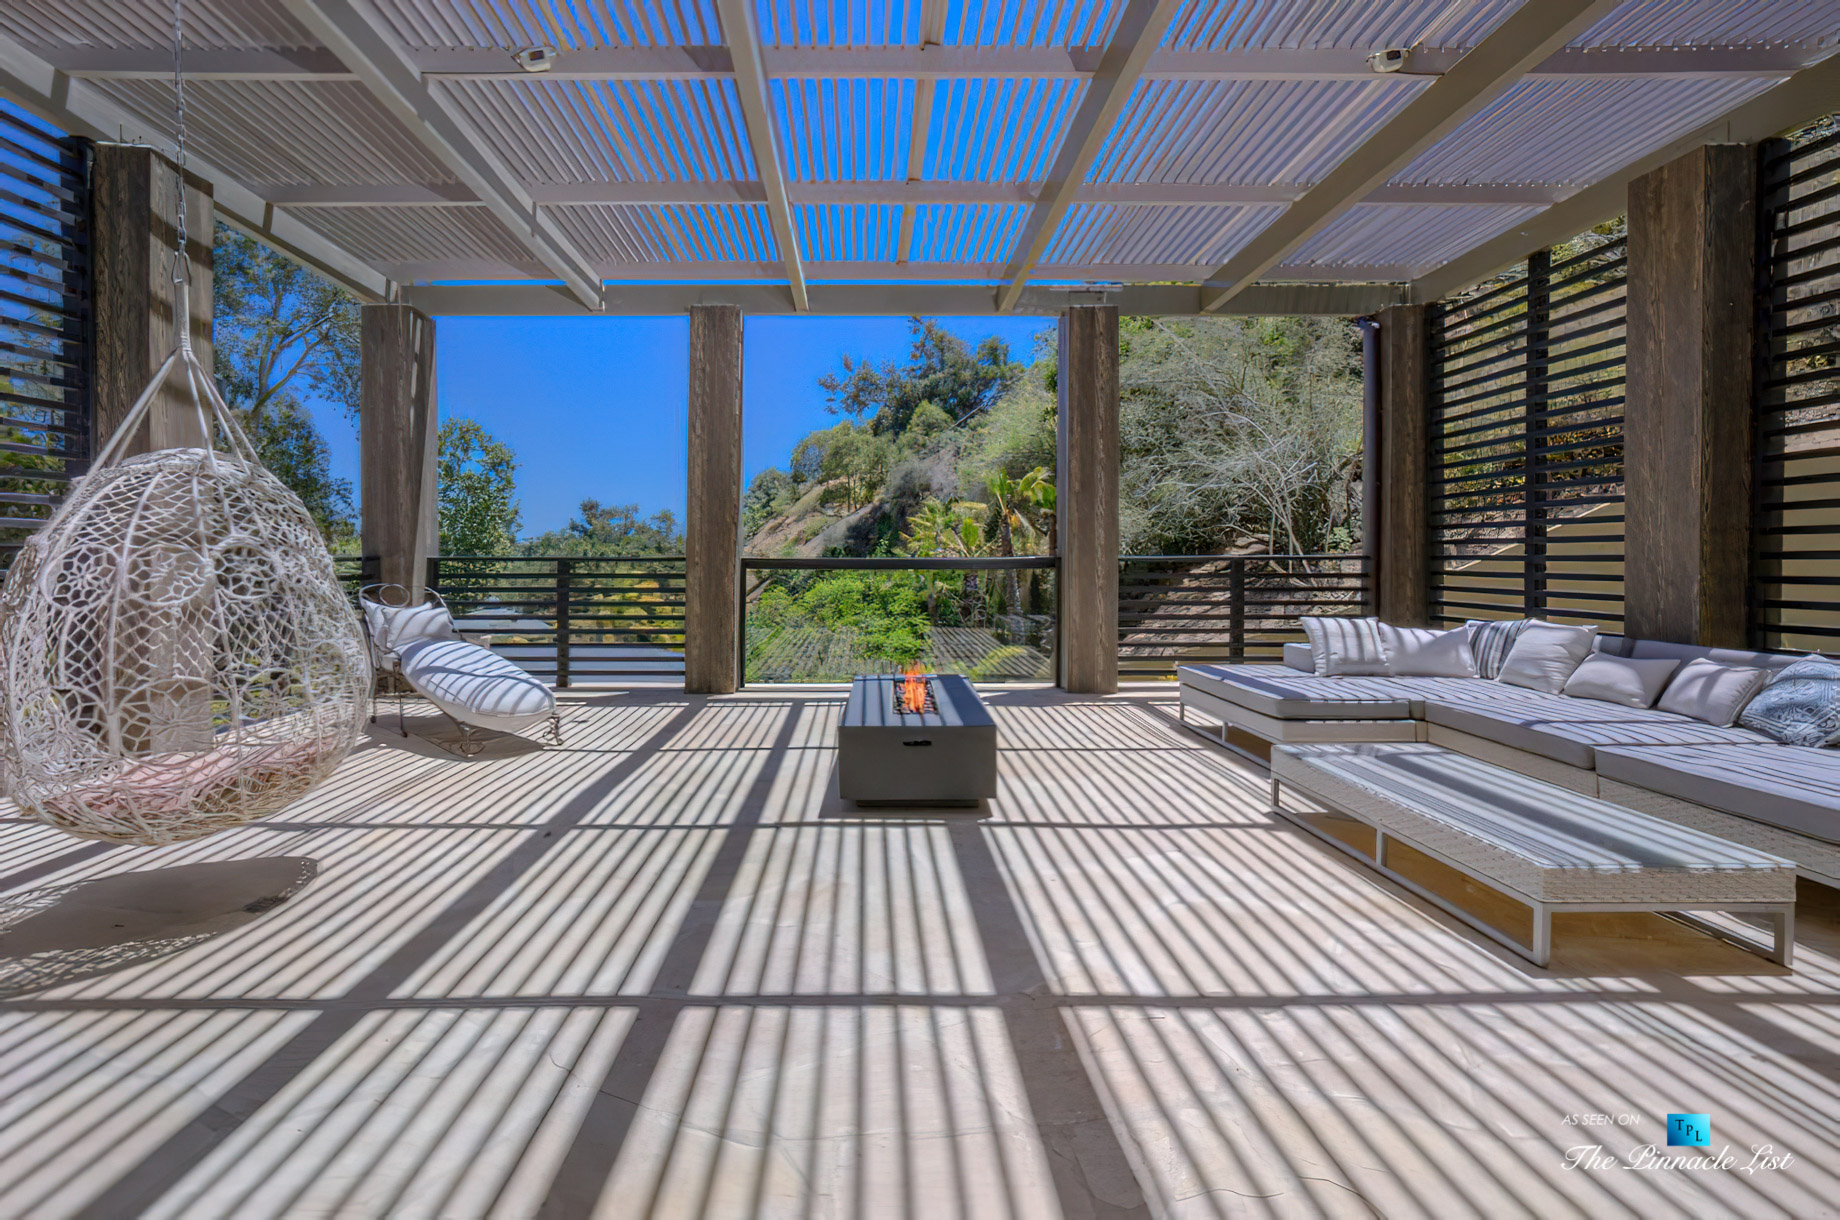 1105 Rivas Canyon Rd, Pacific Palisades, CA, USA - Luxury Real Estate - Master Bedroom Deck